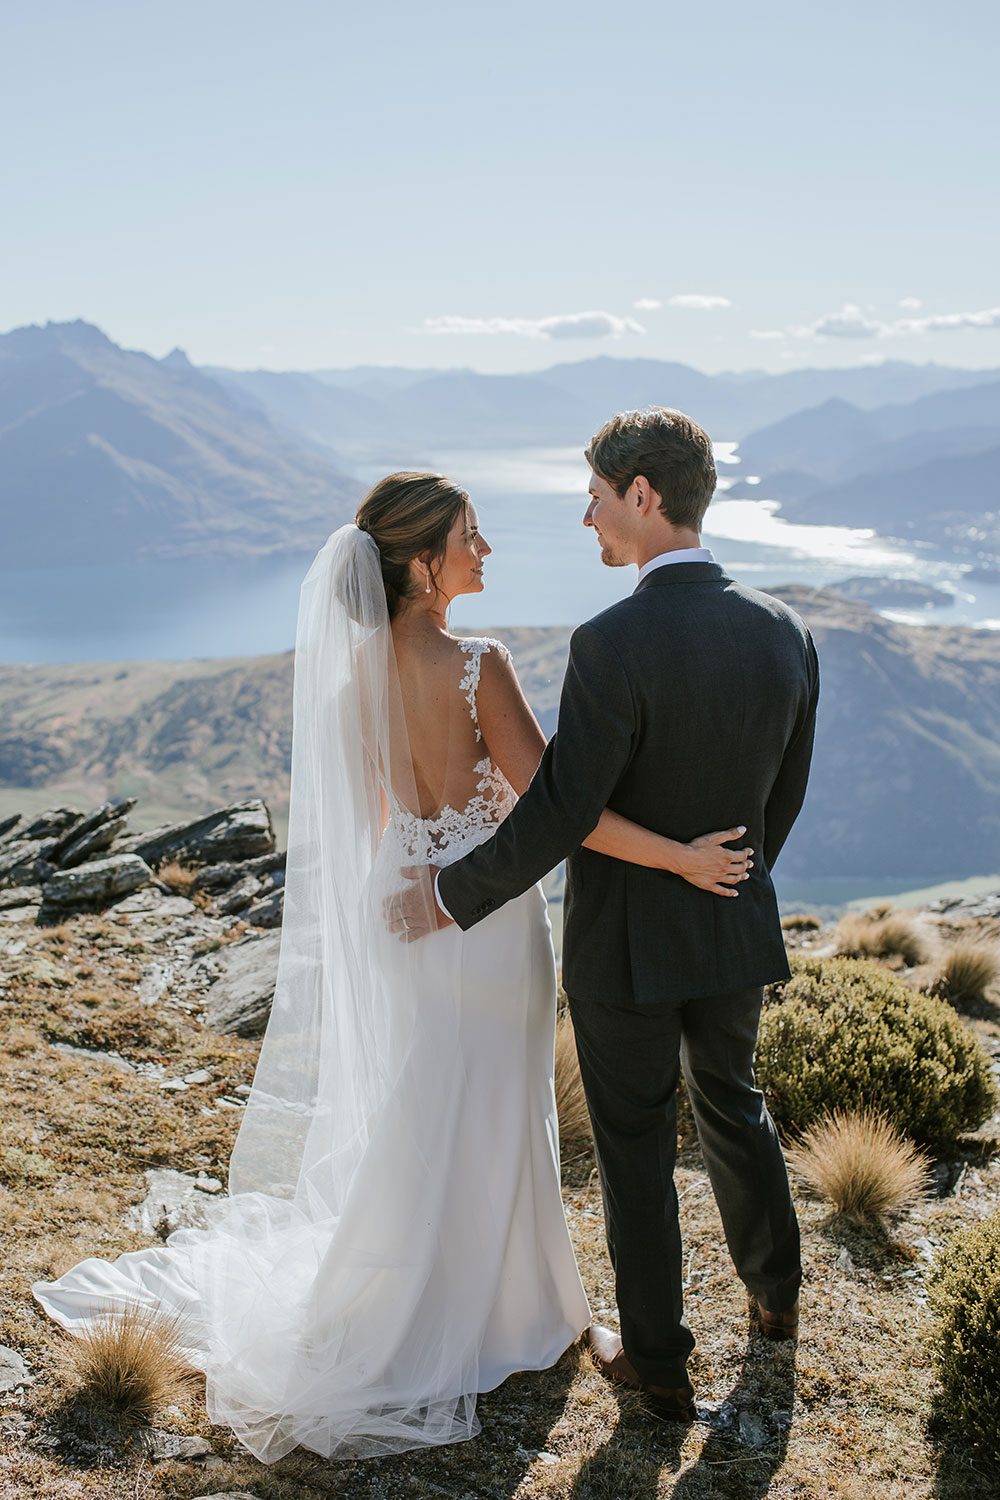 Bride wearing bespoke bridal gown with richly beaded lace over sheer tulle bodice and low back from Auckland wedding dress designer Vinka designs - back embrace with groom